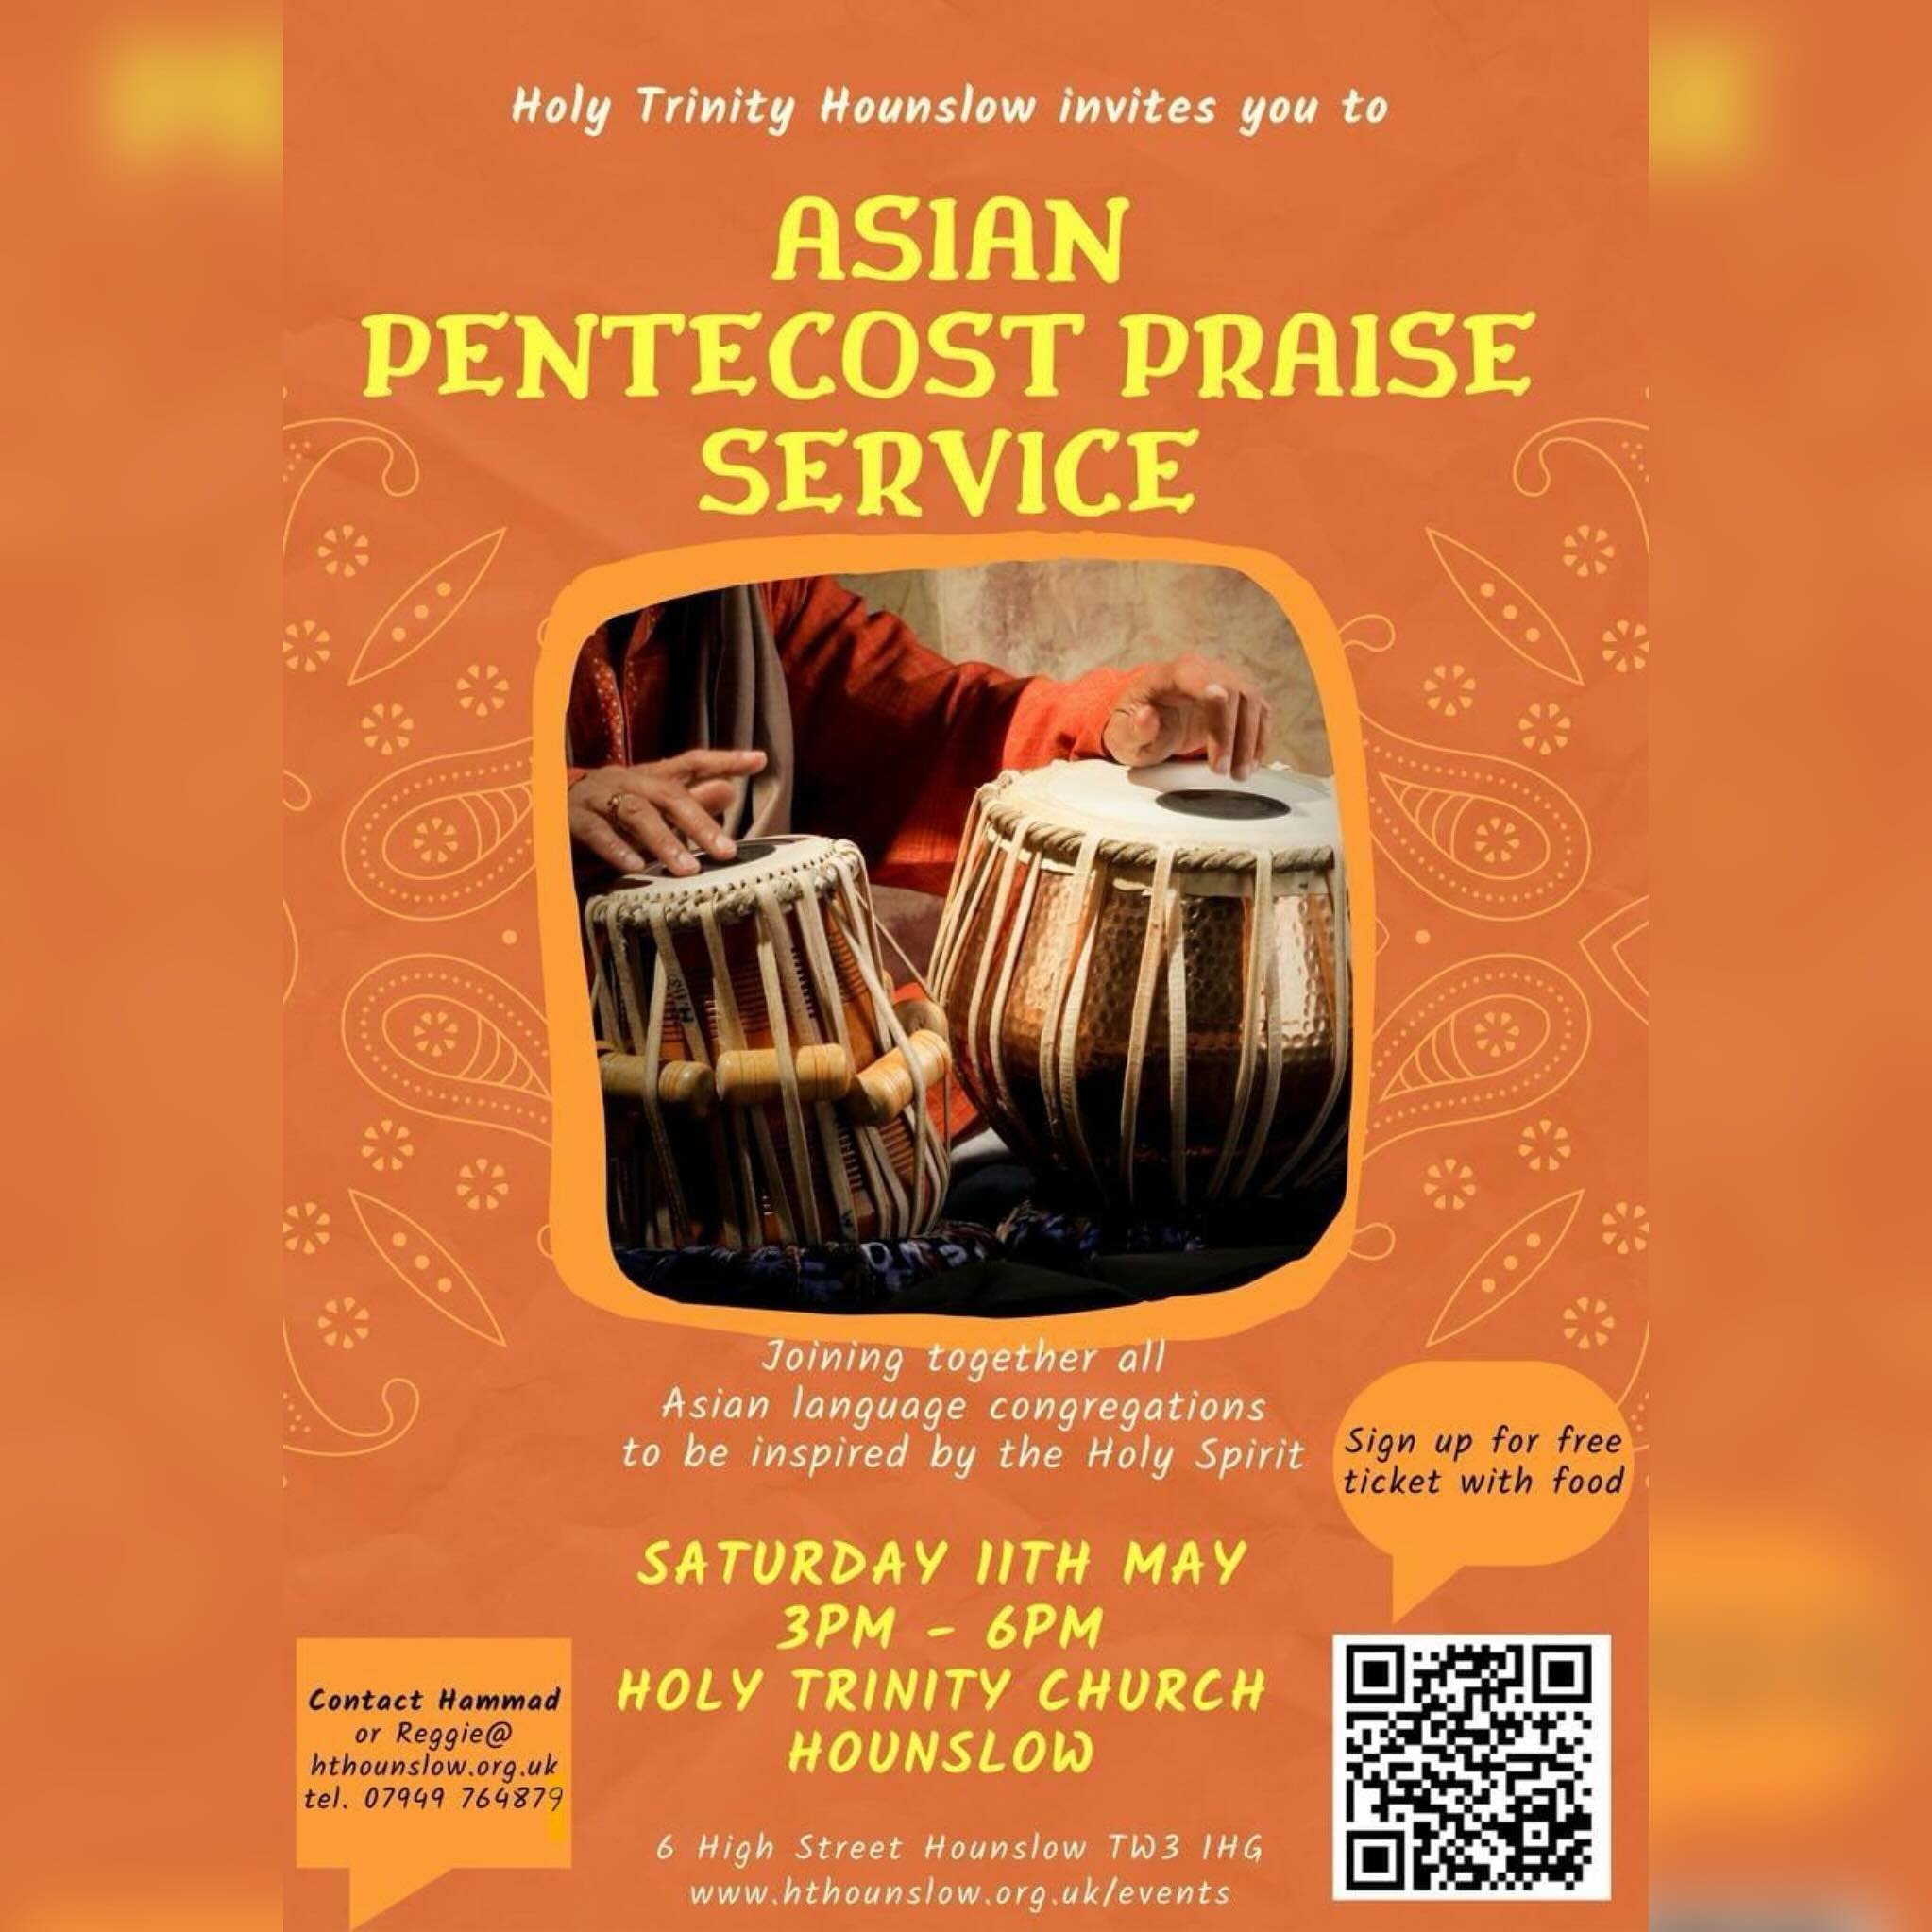 Holy Trinity Church invites you to the Asian Pentecost Praise Service 
joining together Asian language congregations to be inspired by the Holy Spirit as we prepare for Pentecost.

Please sign up in our website if you wish to attend as we will be ser